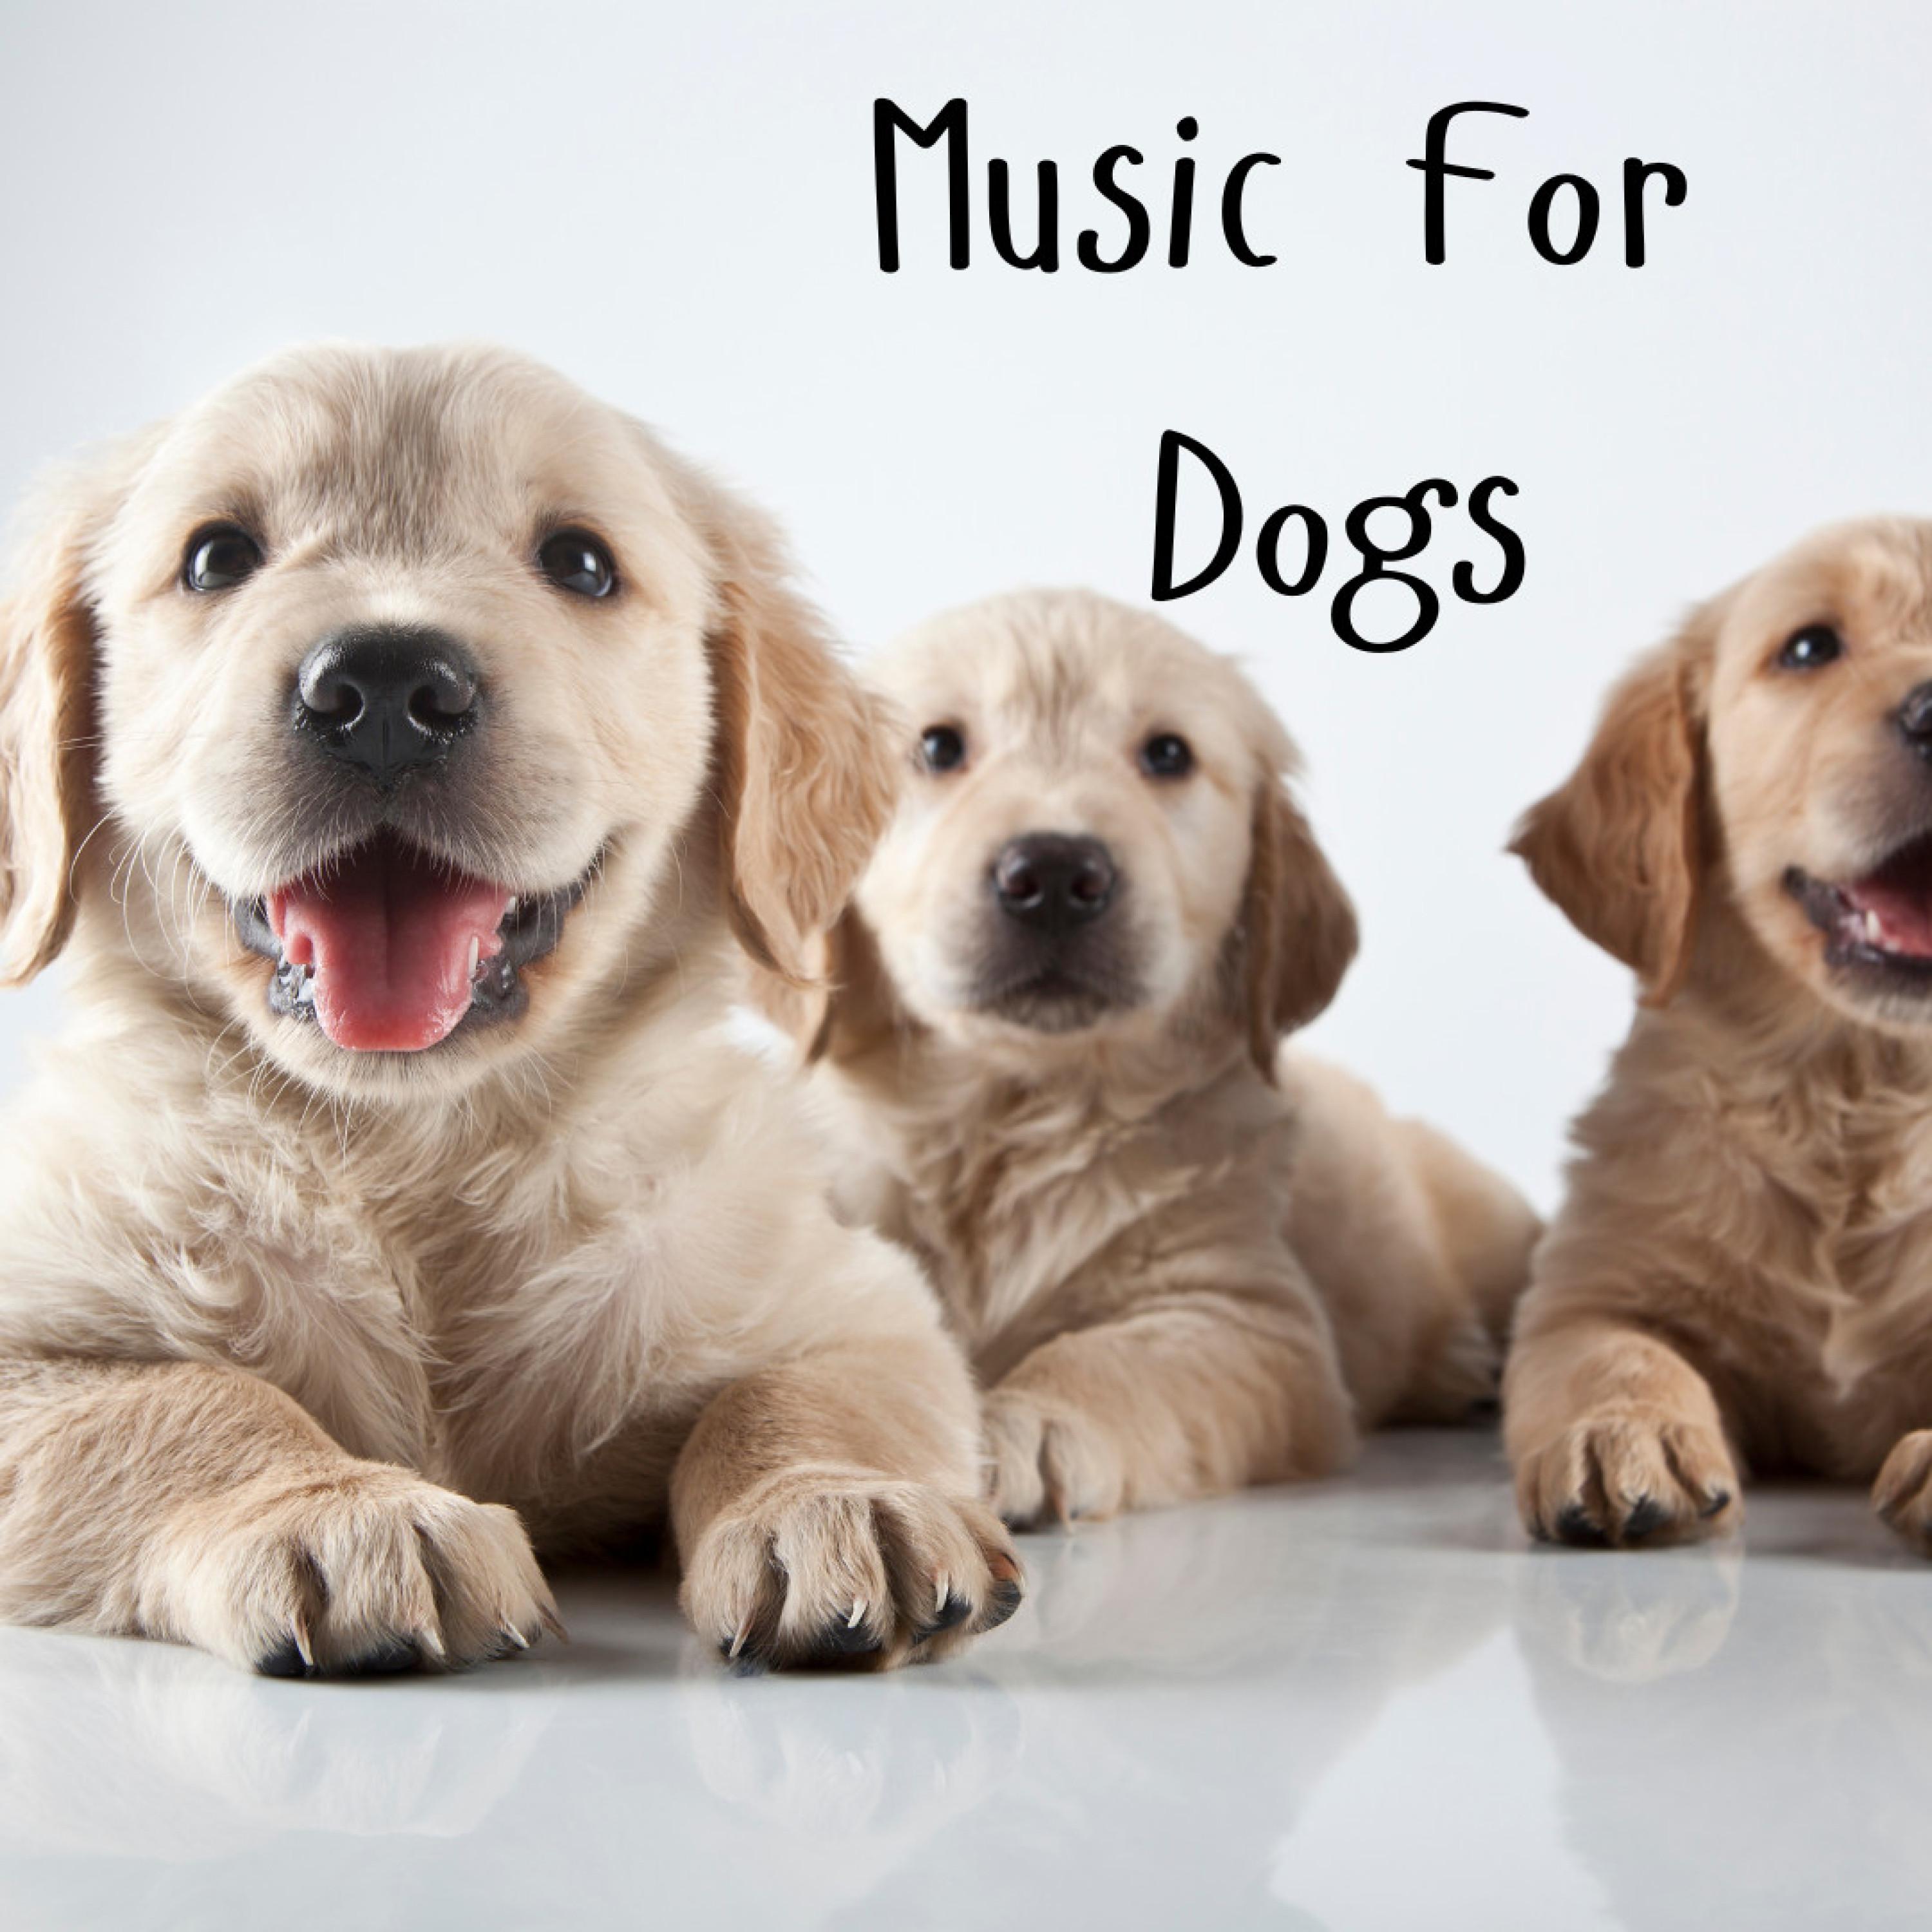 Music For Dogs - Classical Music For Dogs